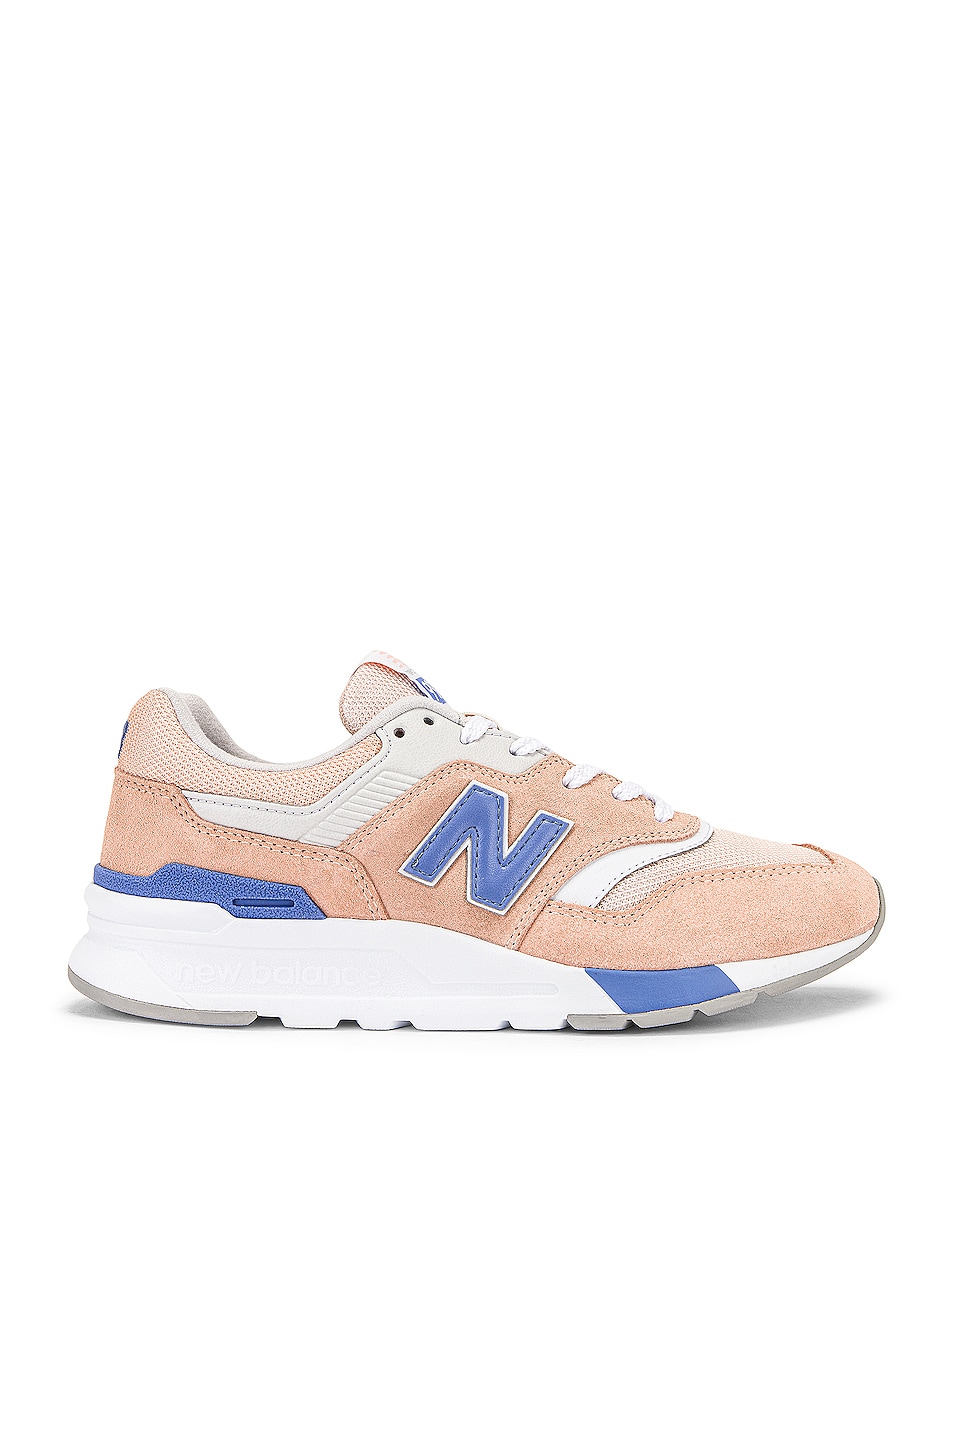 Image 1 of New Balance 997H Sneakers in Rose Water & Stellar Blue